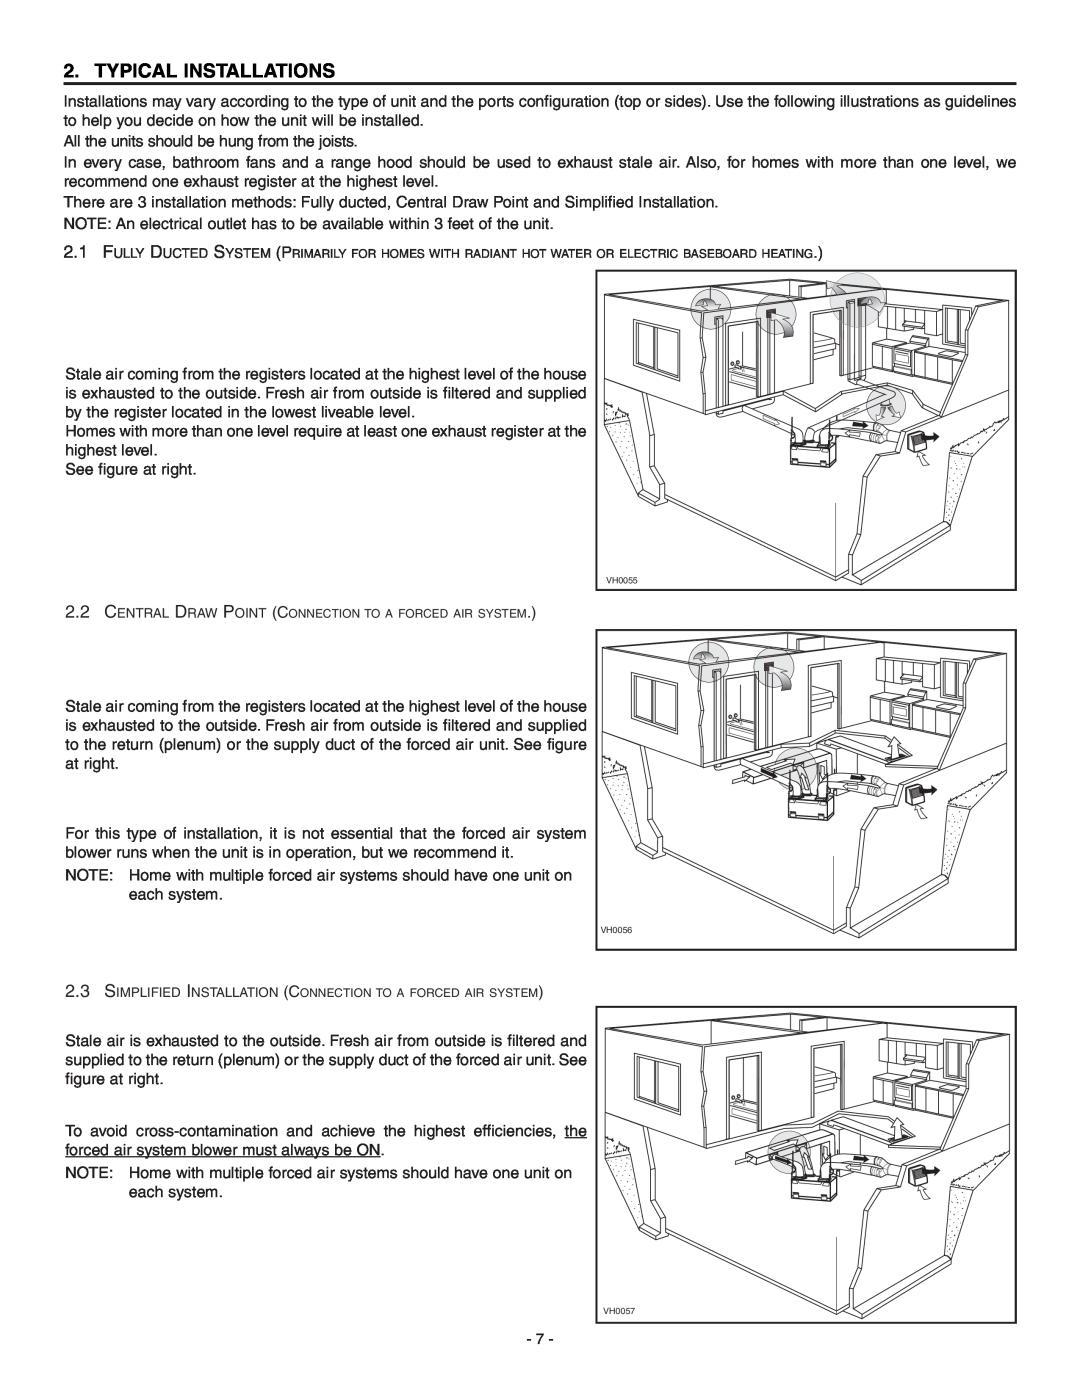 Broan ERV90HCT installation instructions Typical Installations 